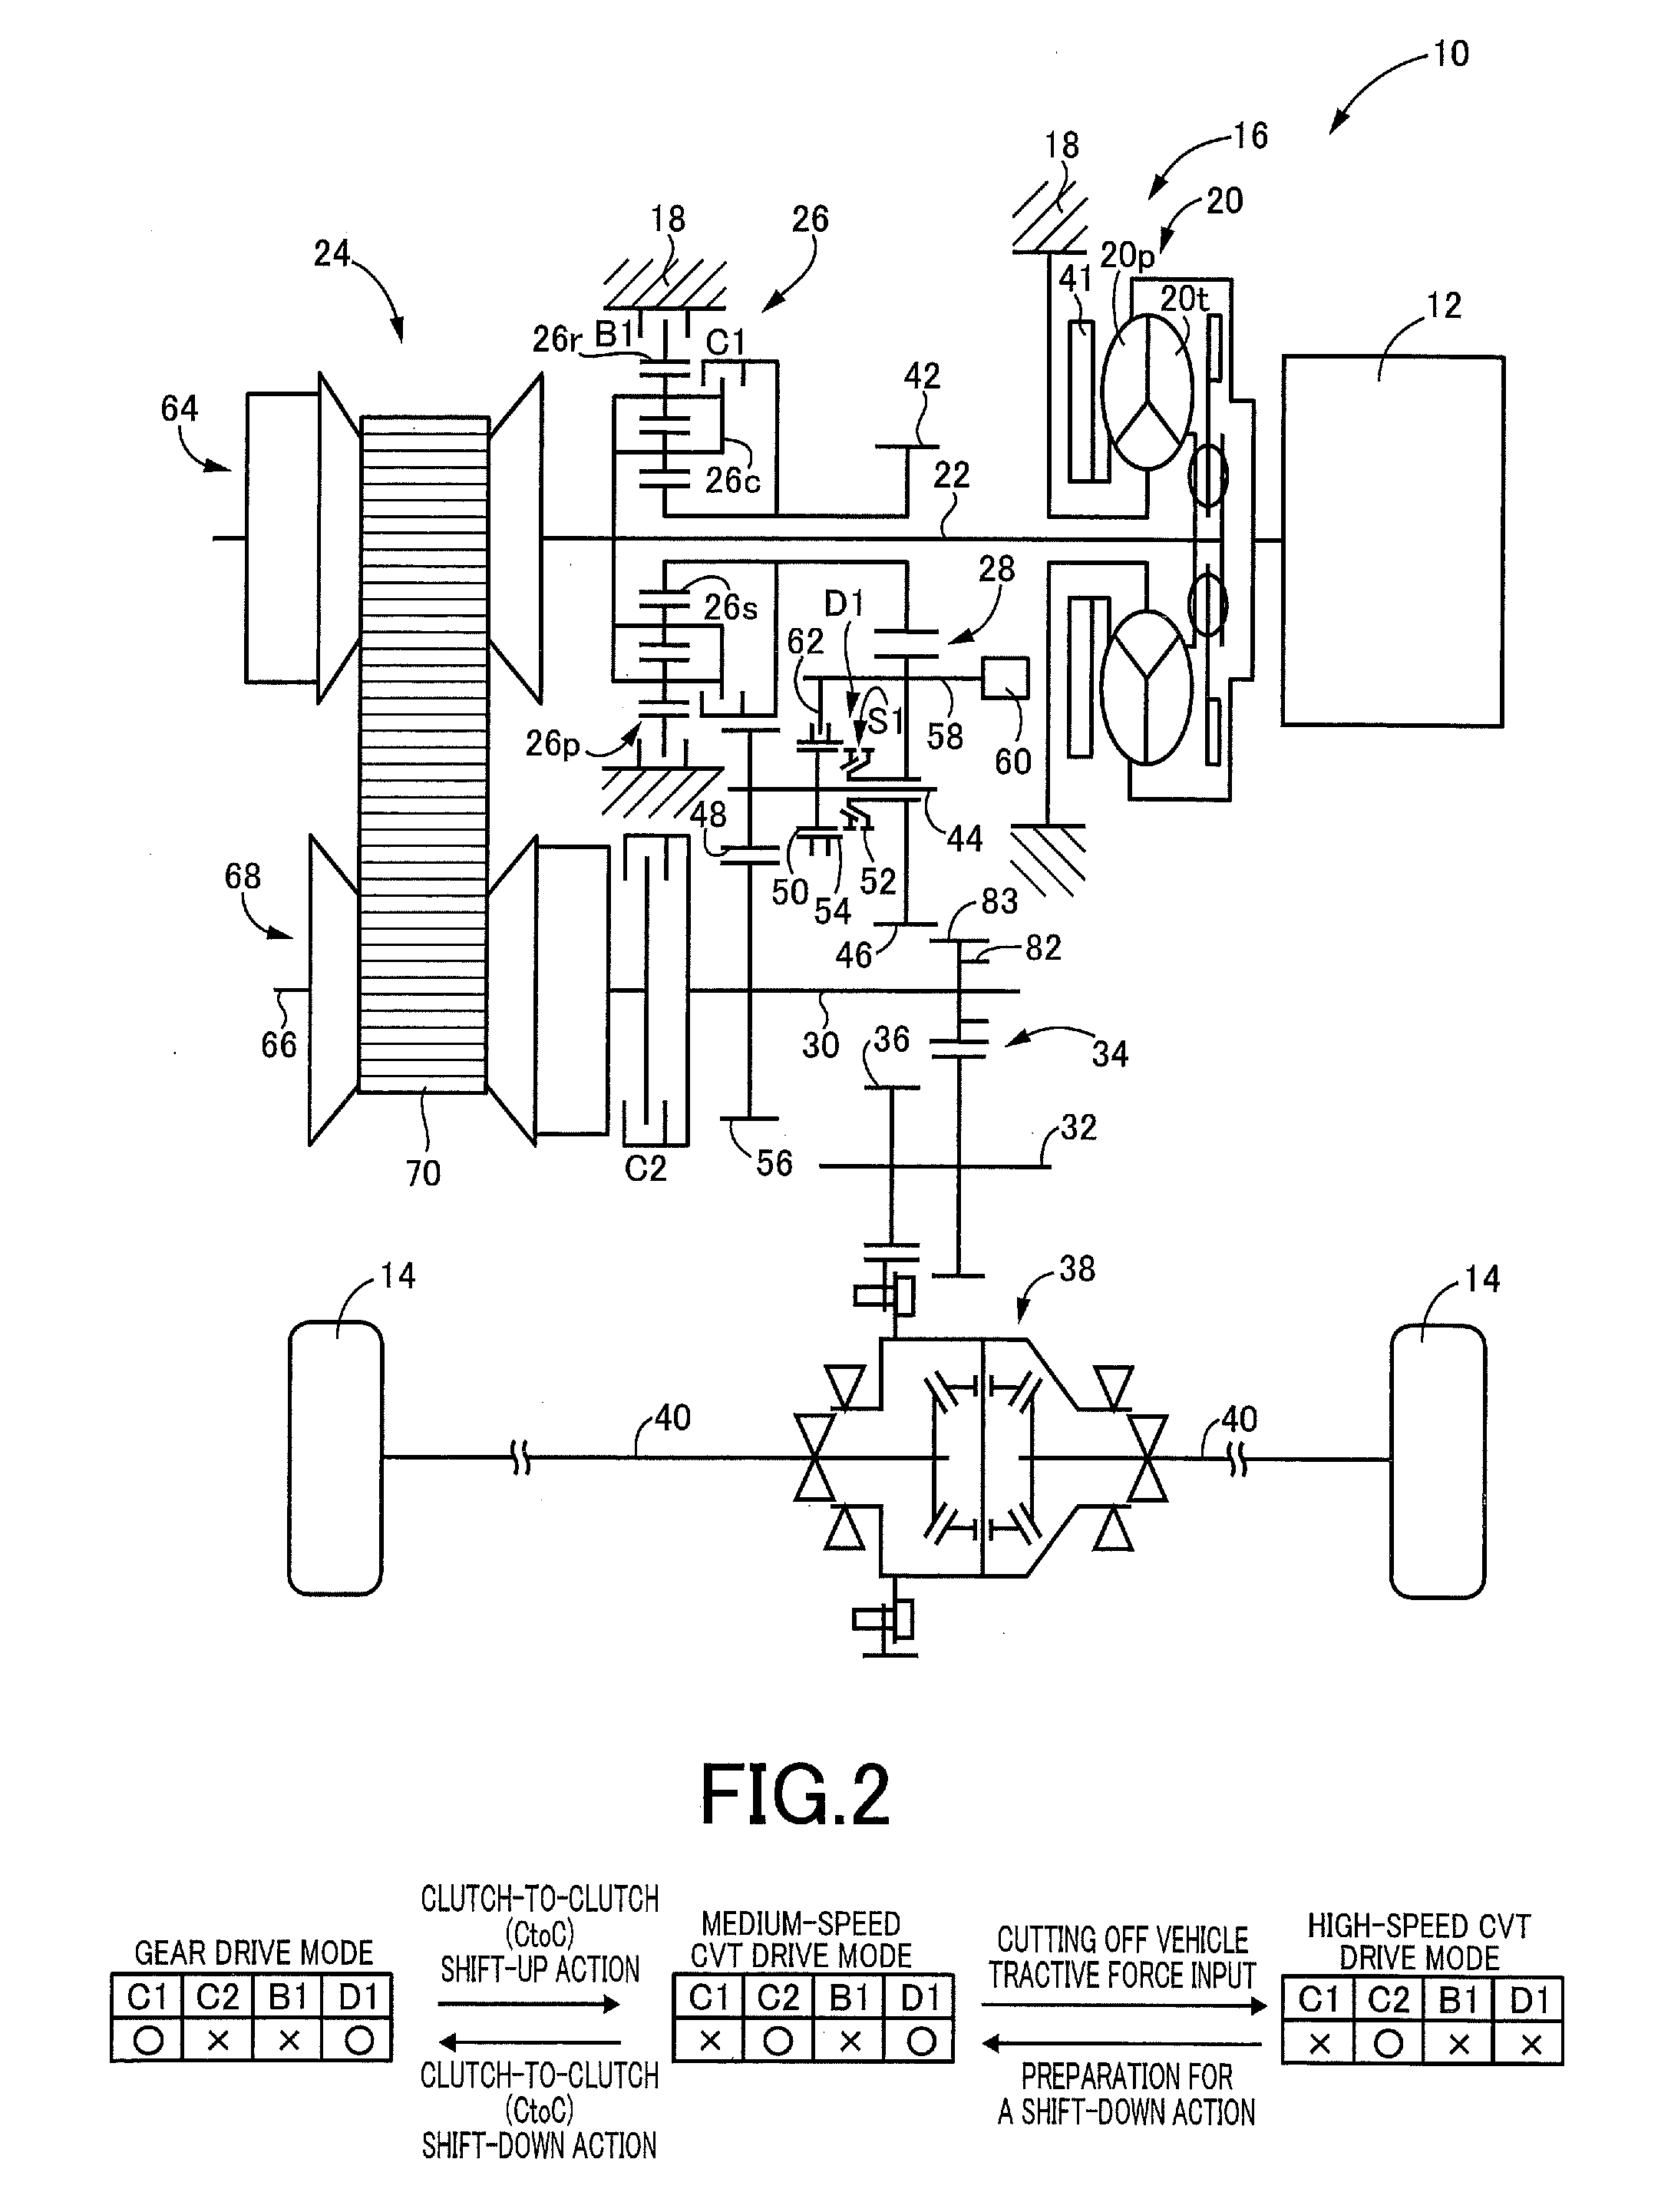 Power transmitting system of a vehicle